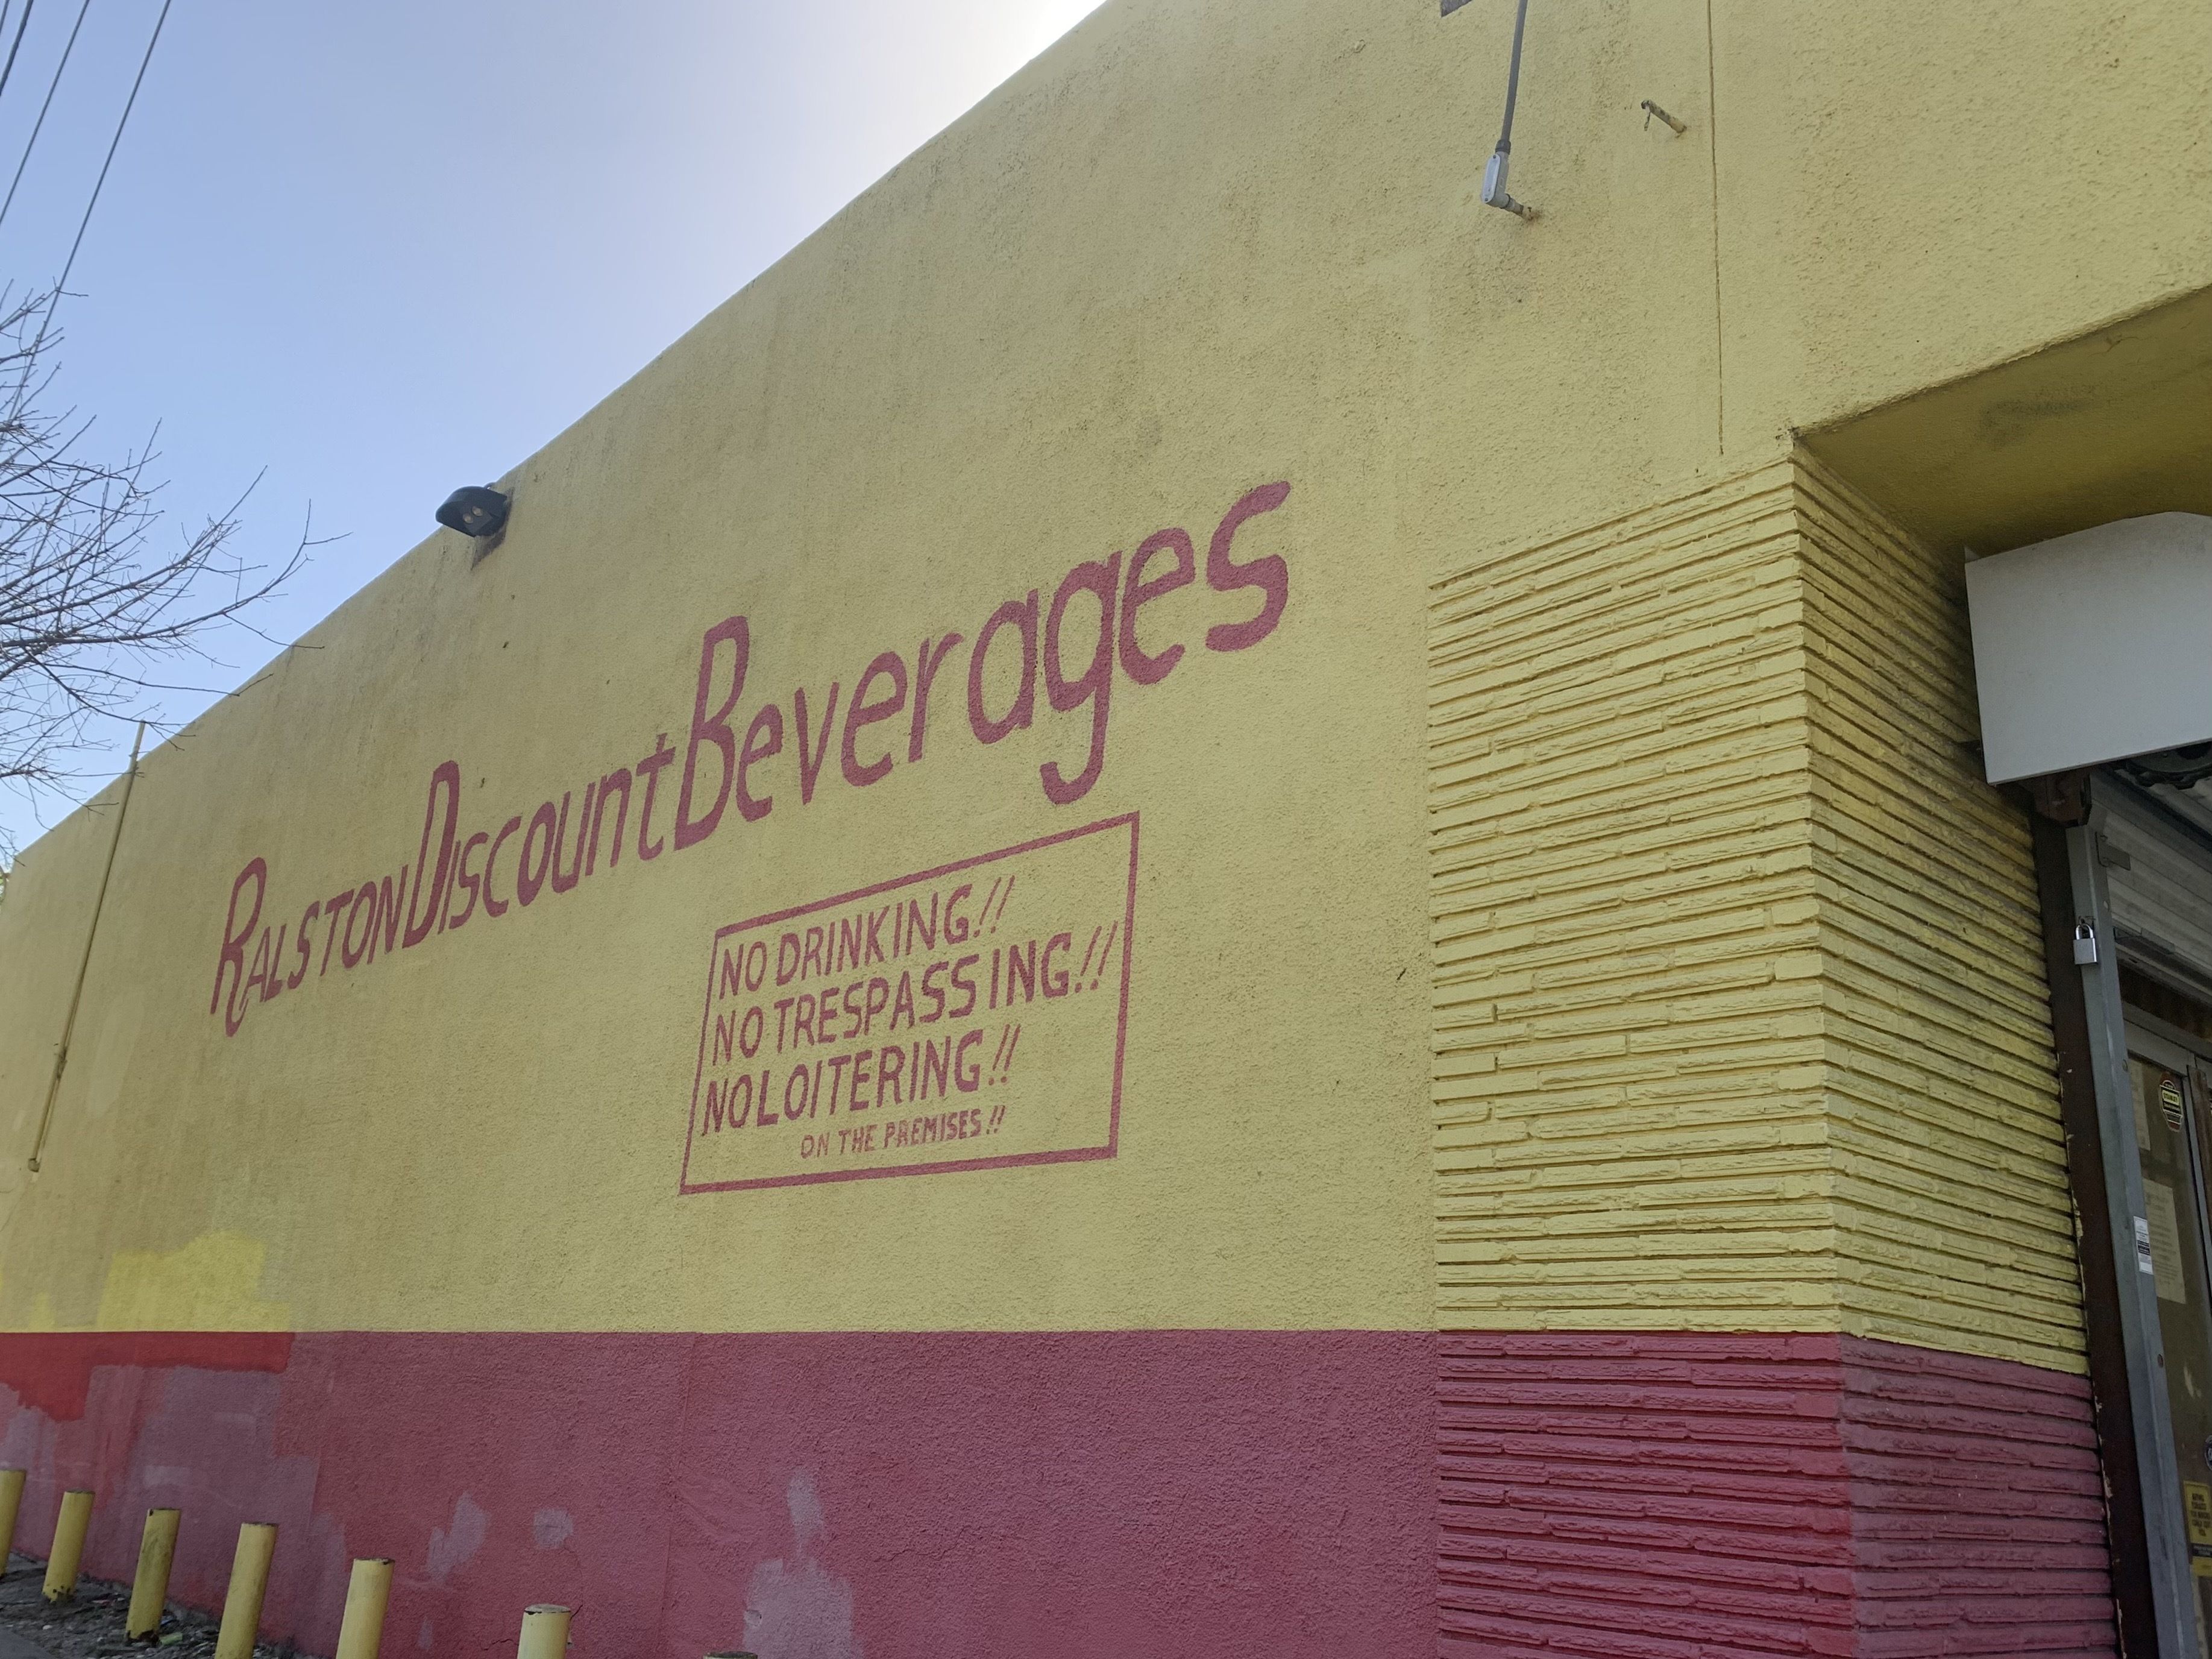 Photo of a red and yellow building with the words "Ralston Discount Beverages"